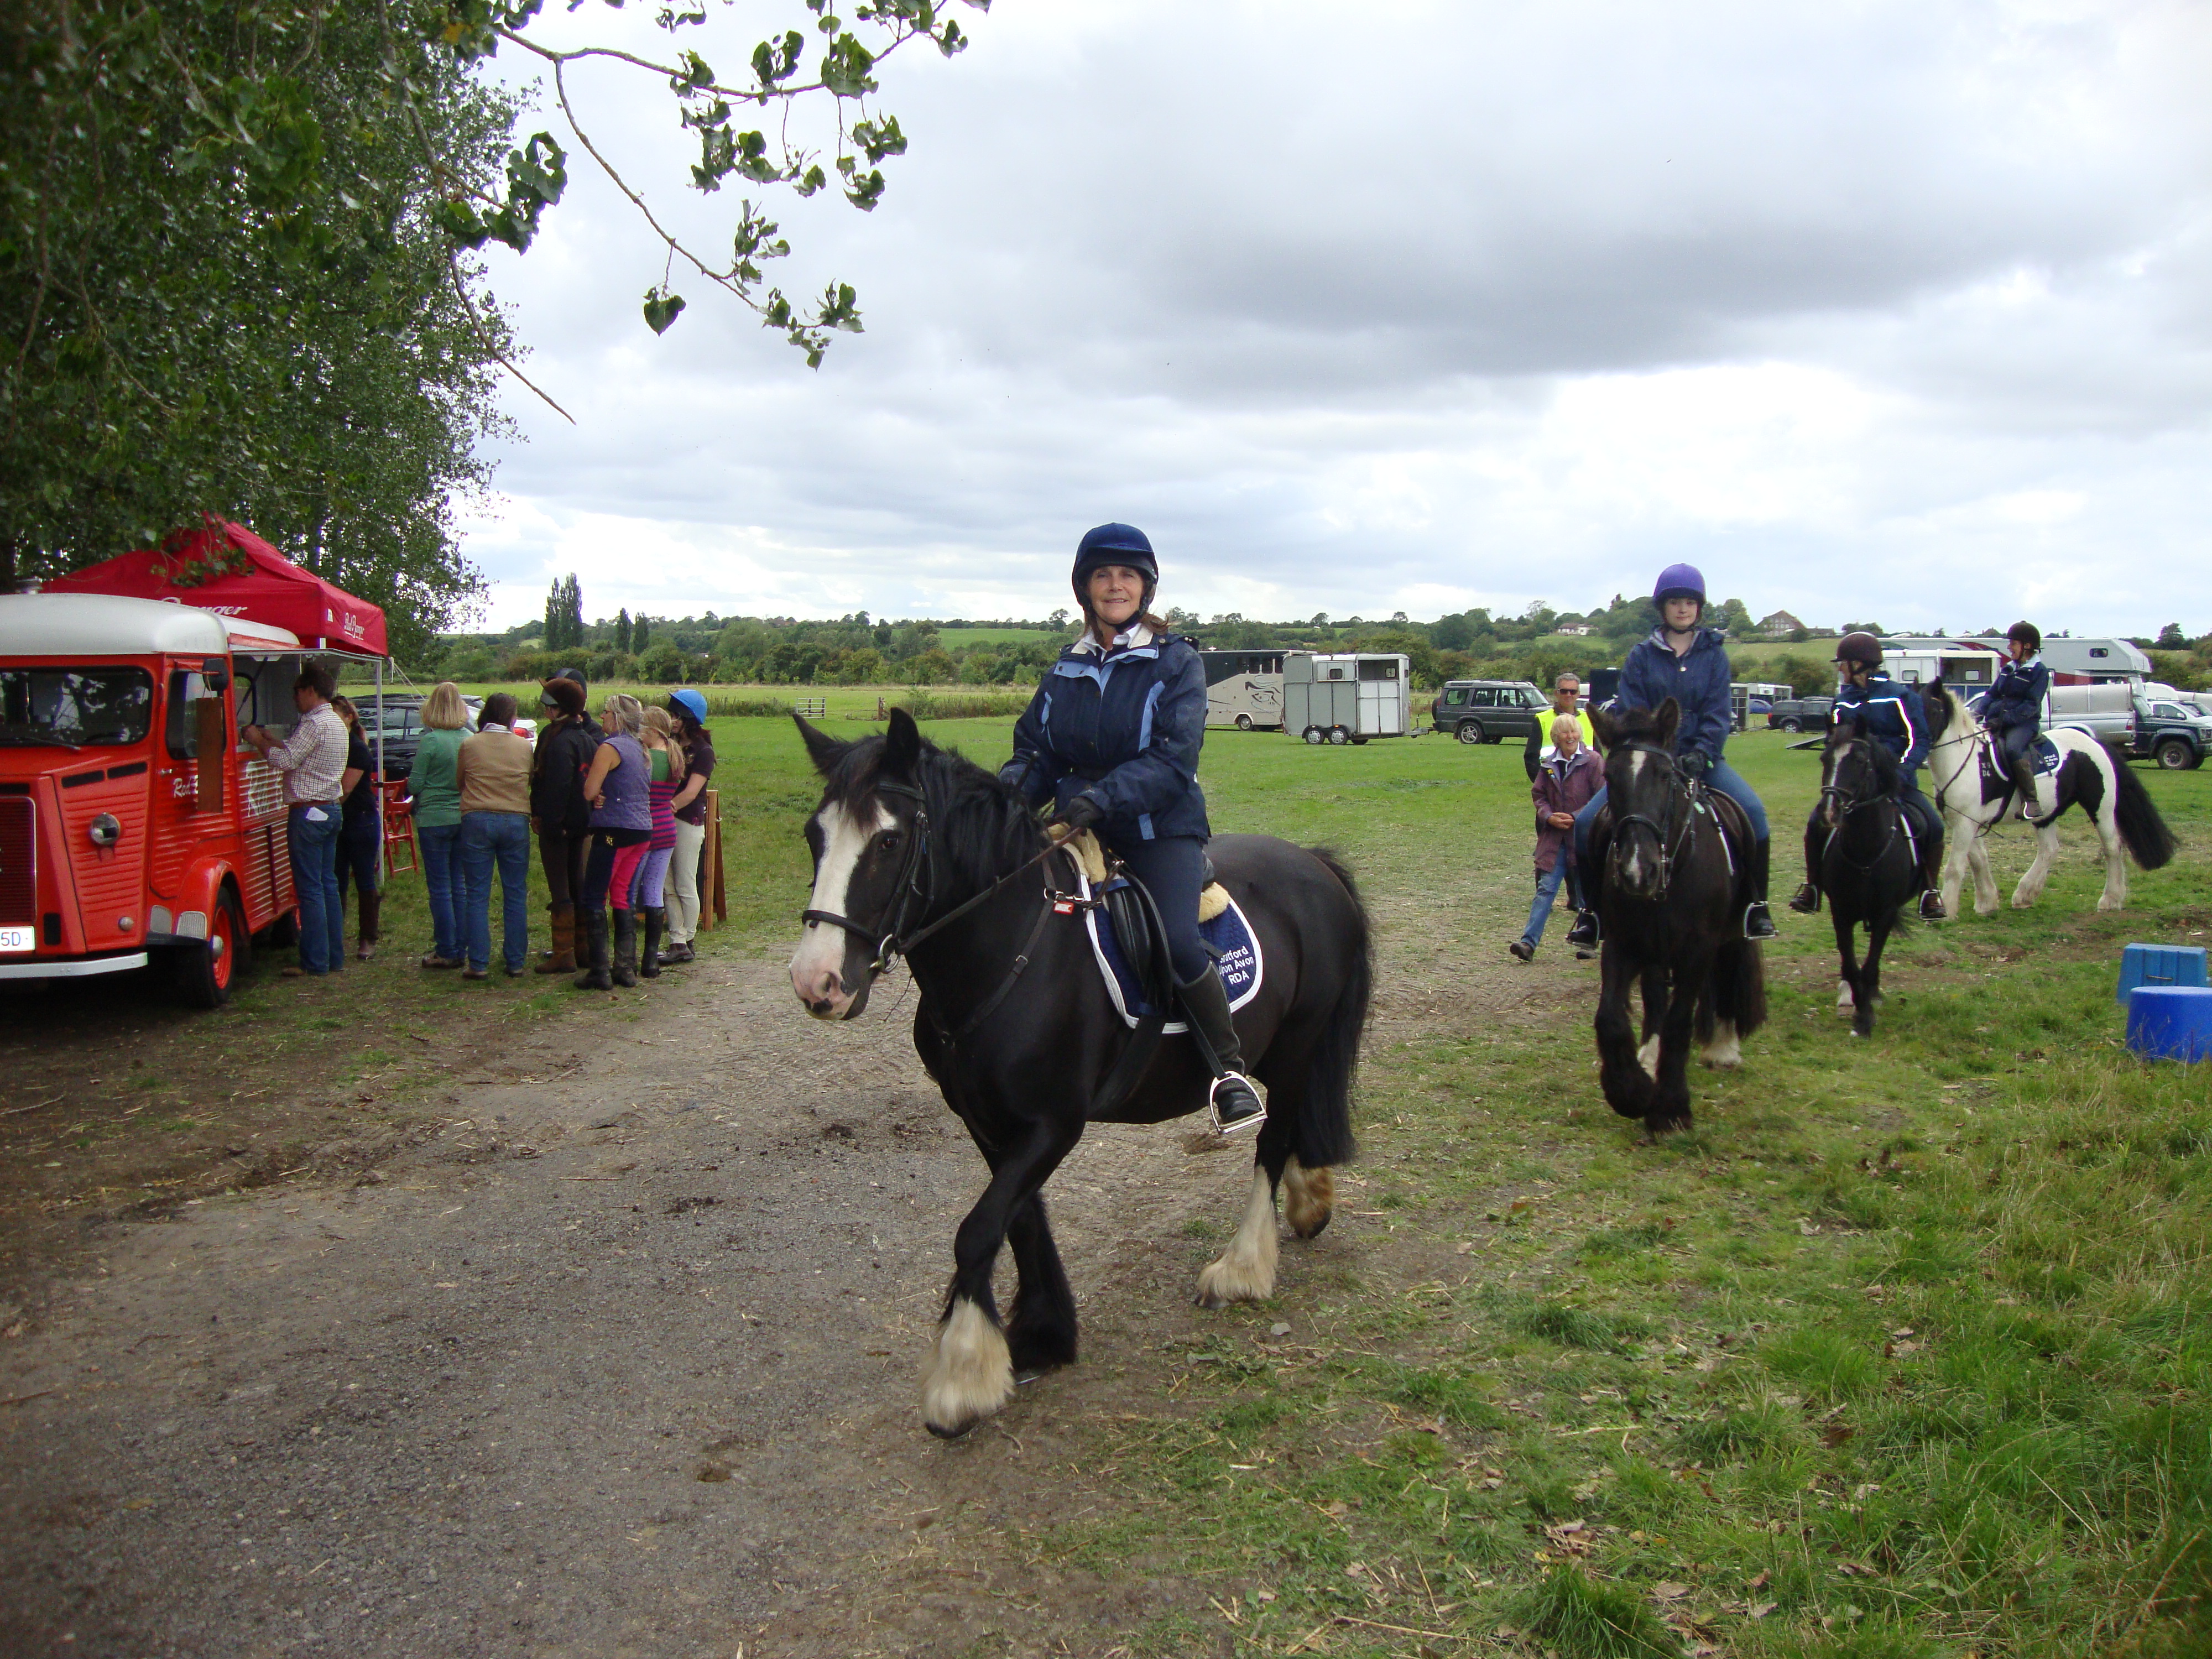 Post image for “Calling all horseriders” Kineton Fun Ride coming up